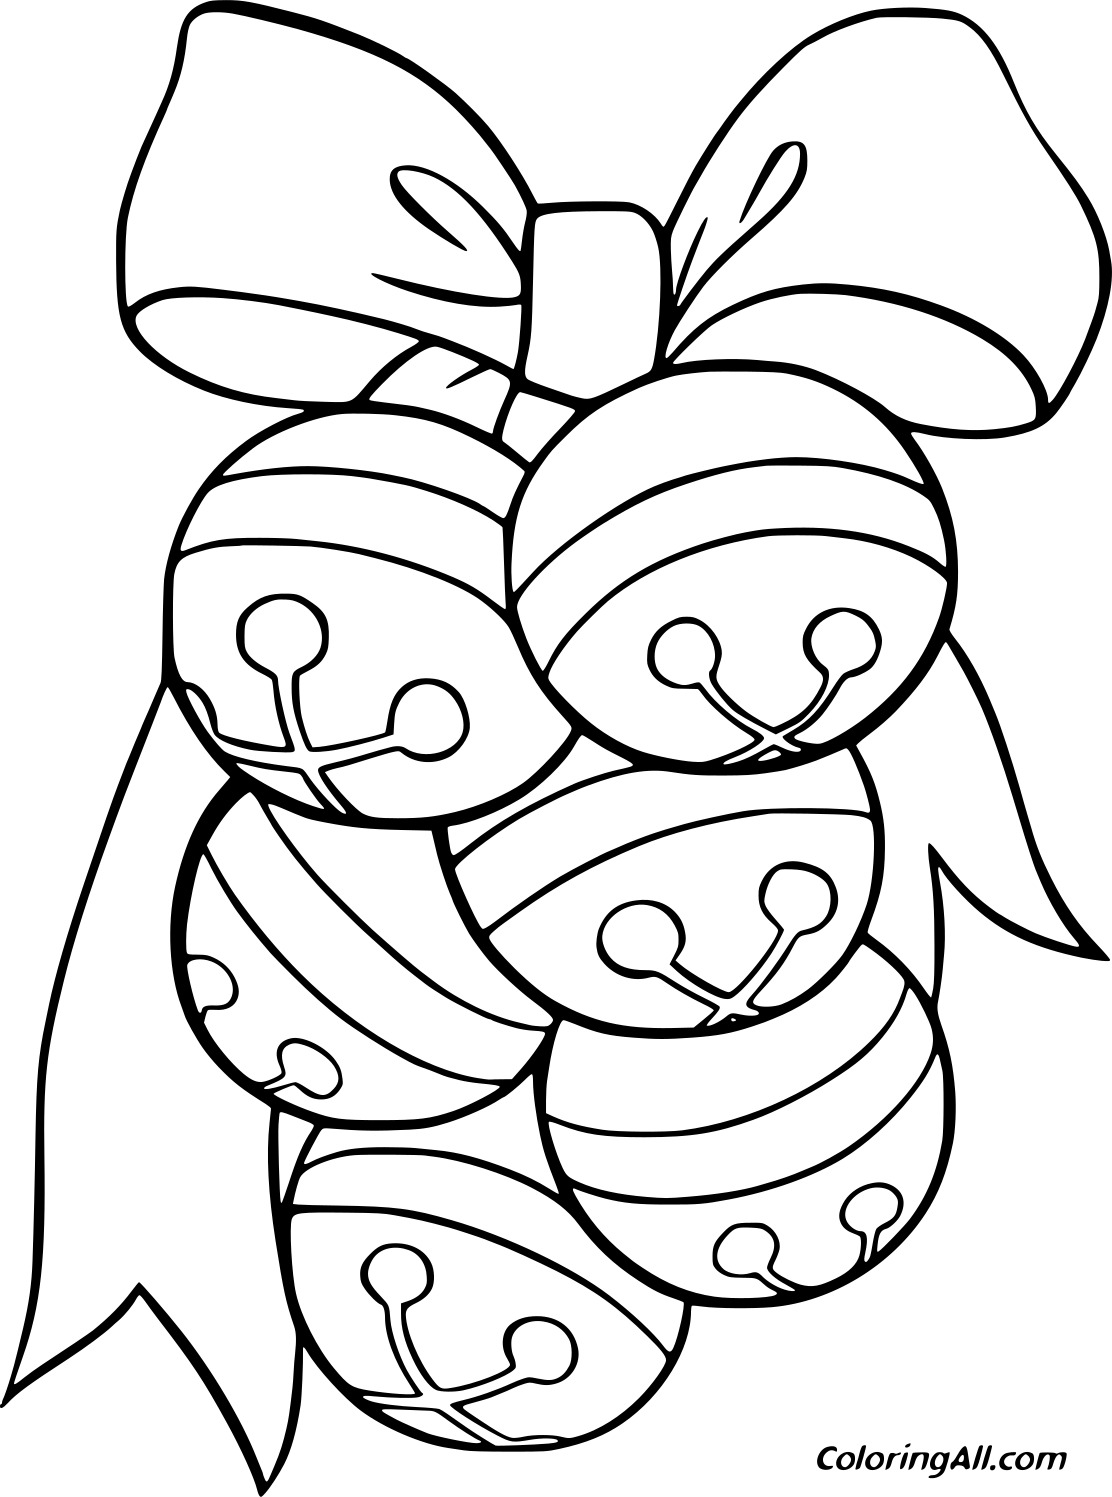 Six Small Bells Printable Coloring Page